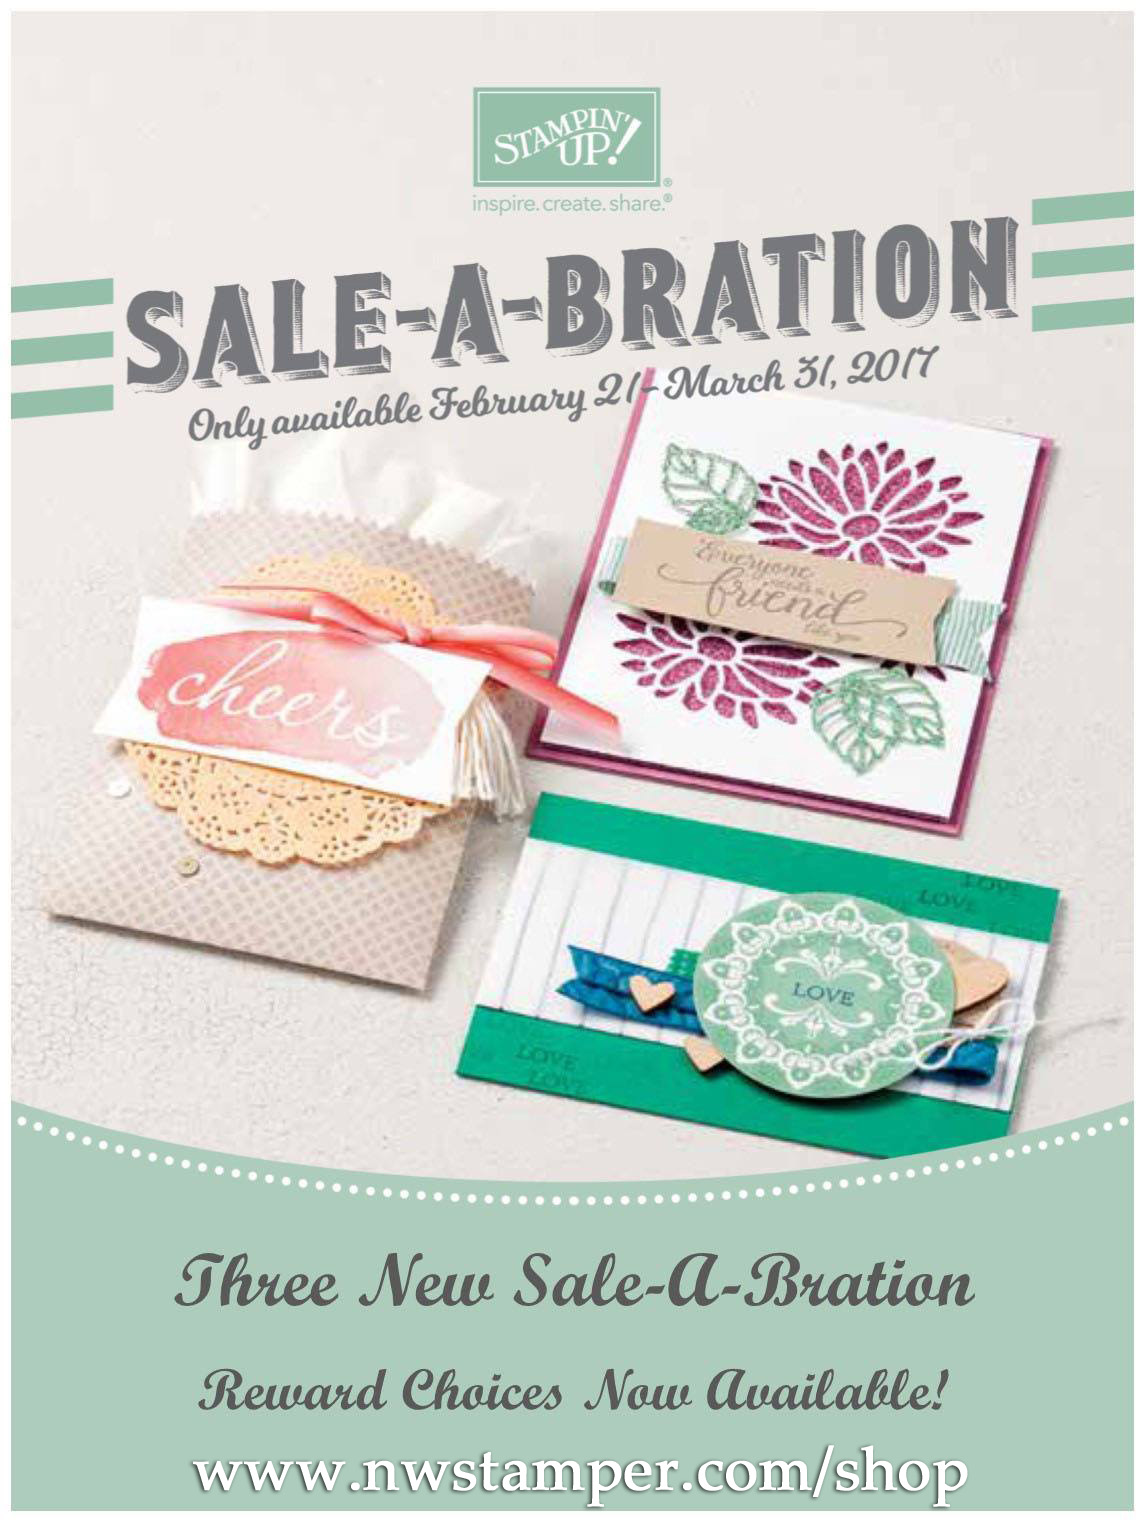 New 2017 Sale-a-Bration Choices are here!